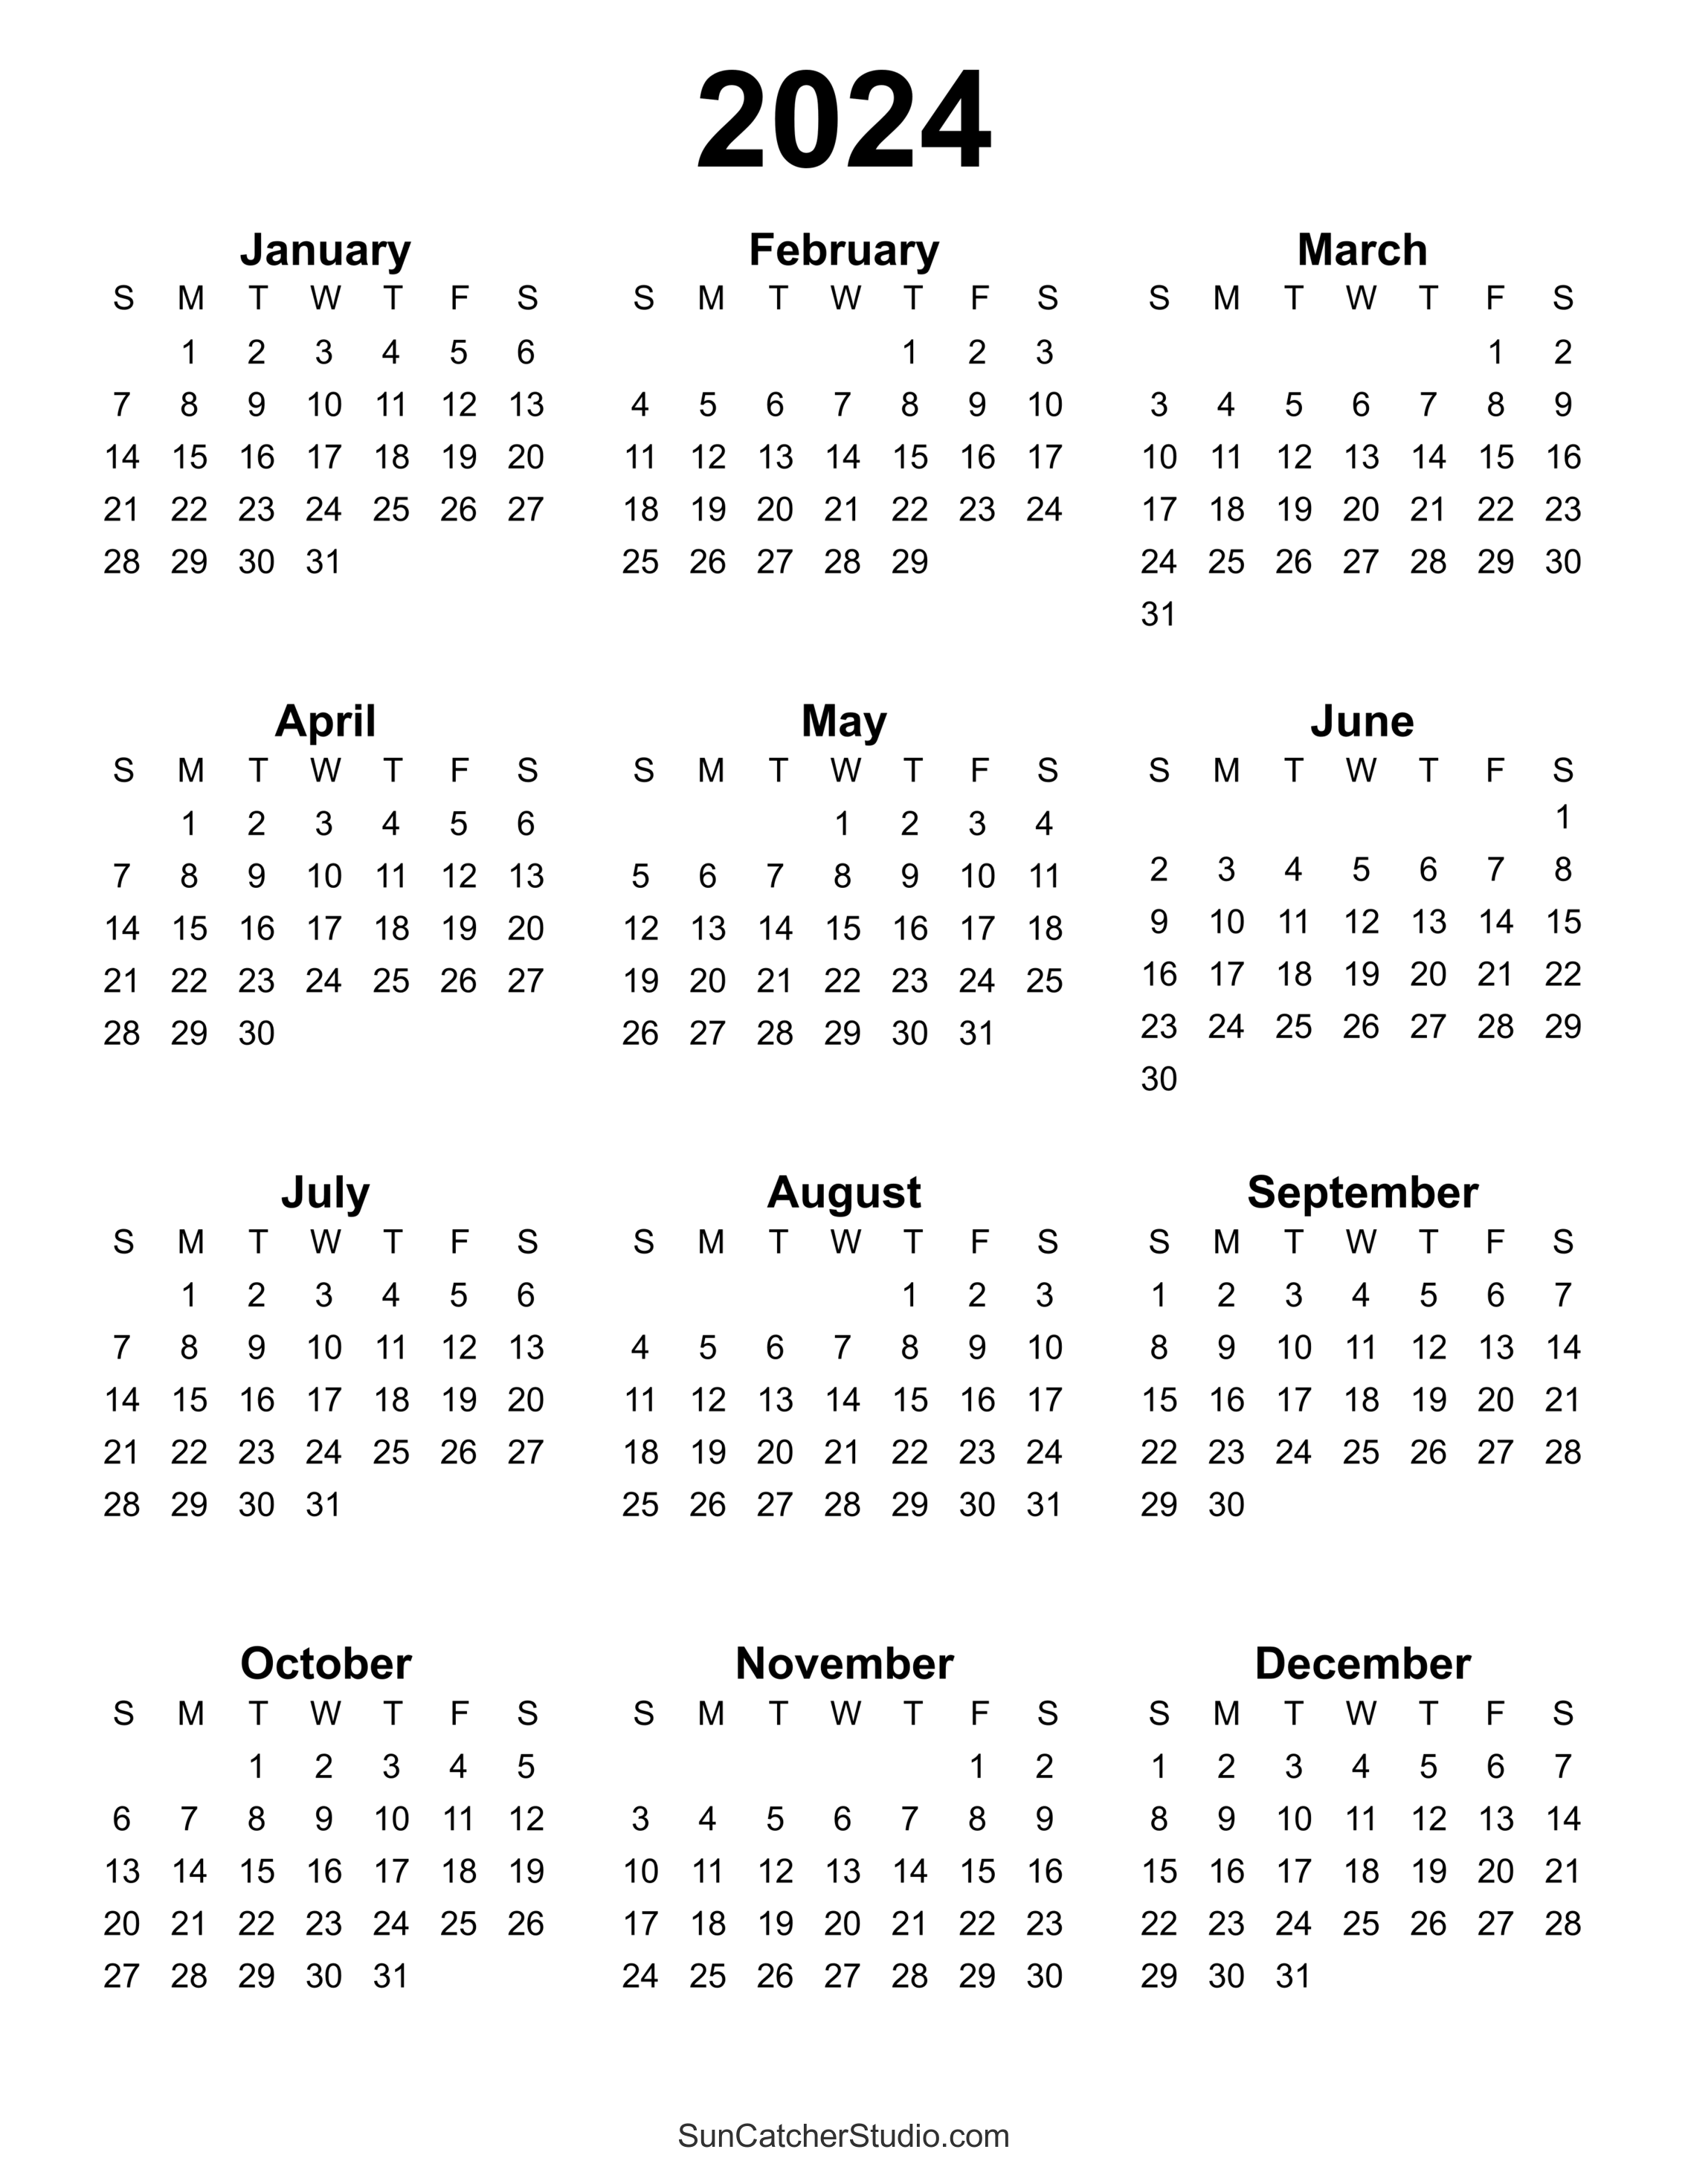 Free Printable 2024 Yearly Calendar – Diy Projects, Patterns regarding Free Printable Calendar 2024 Yearly Pdf